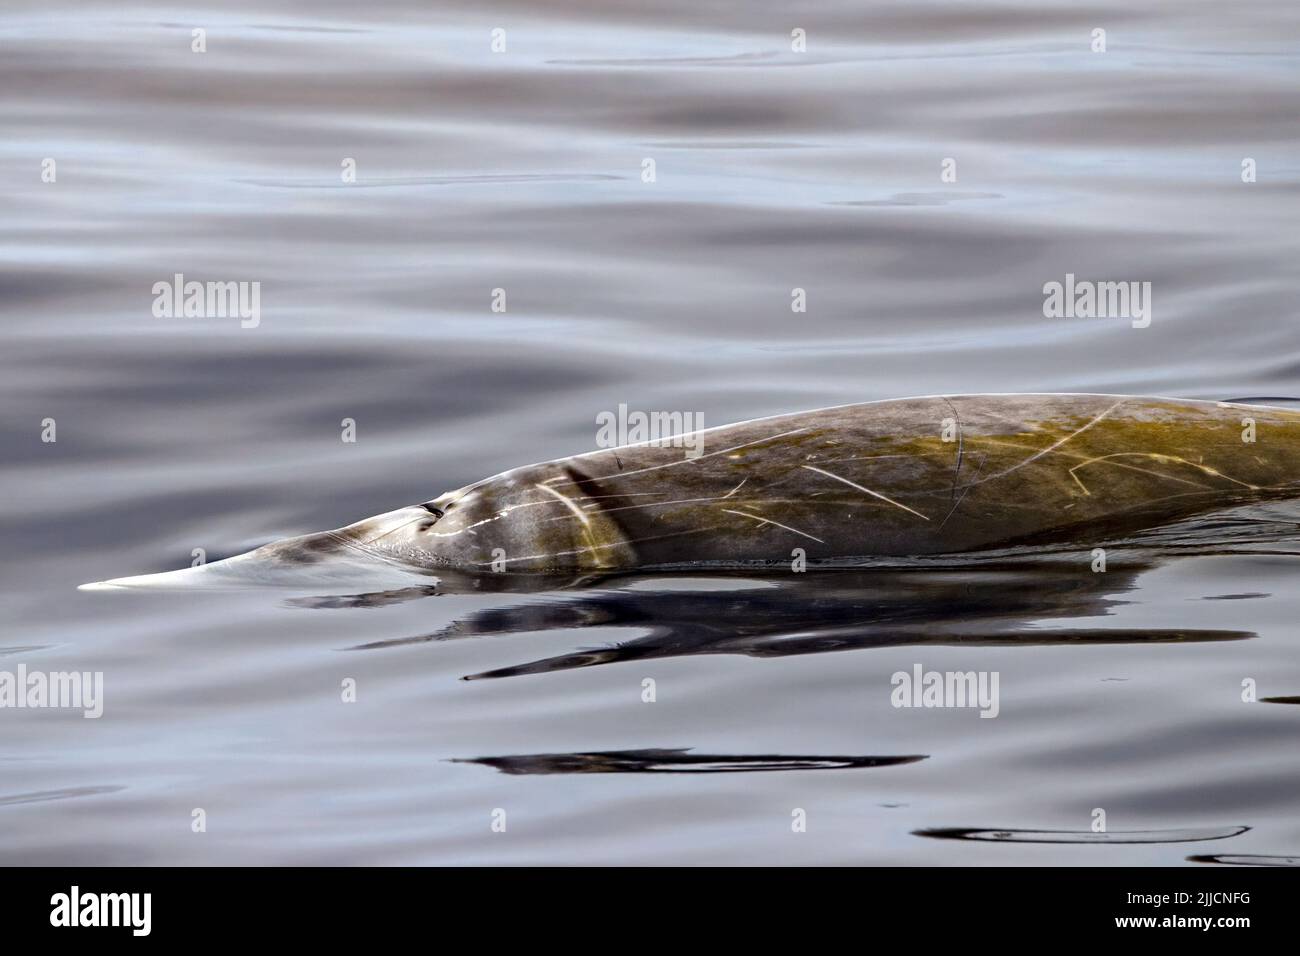 cuvier beaked whale close up portrait on calm sea surface Stock Photo